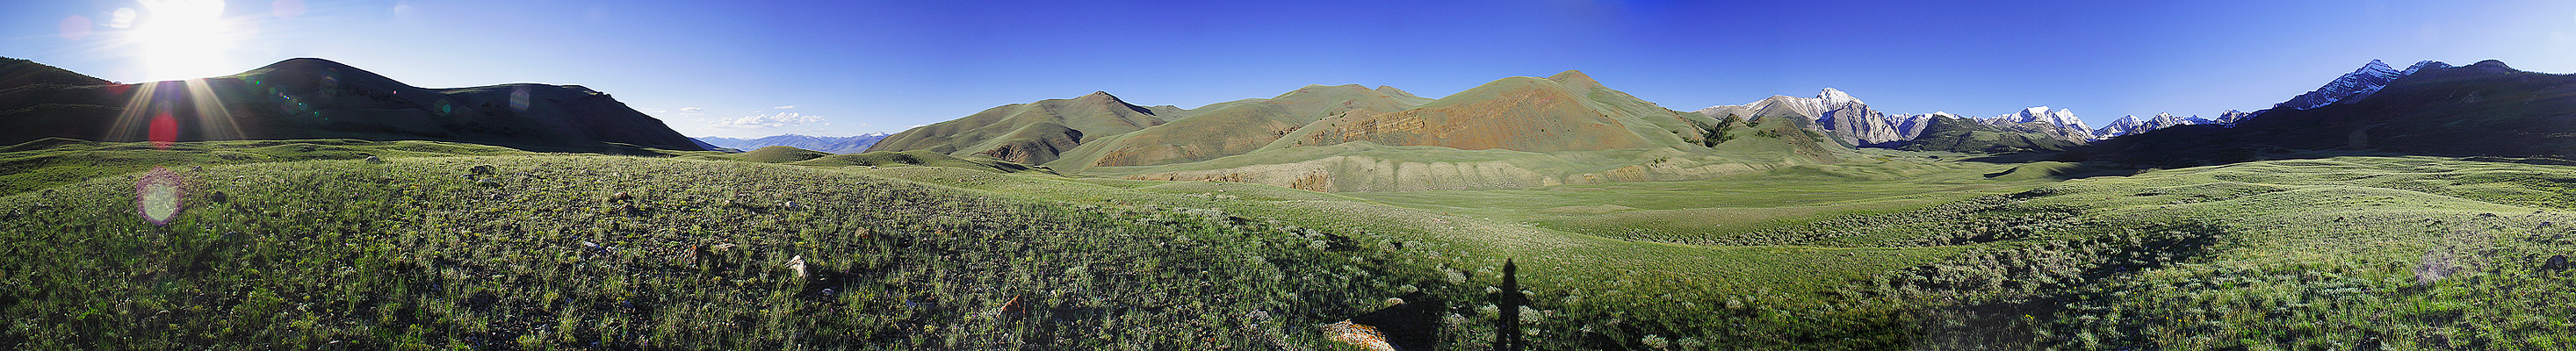 360 degree view of the Upper Pahsimeroi Valley